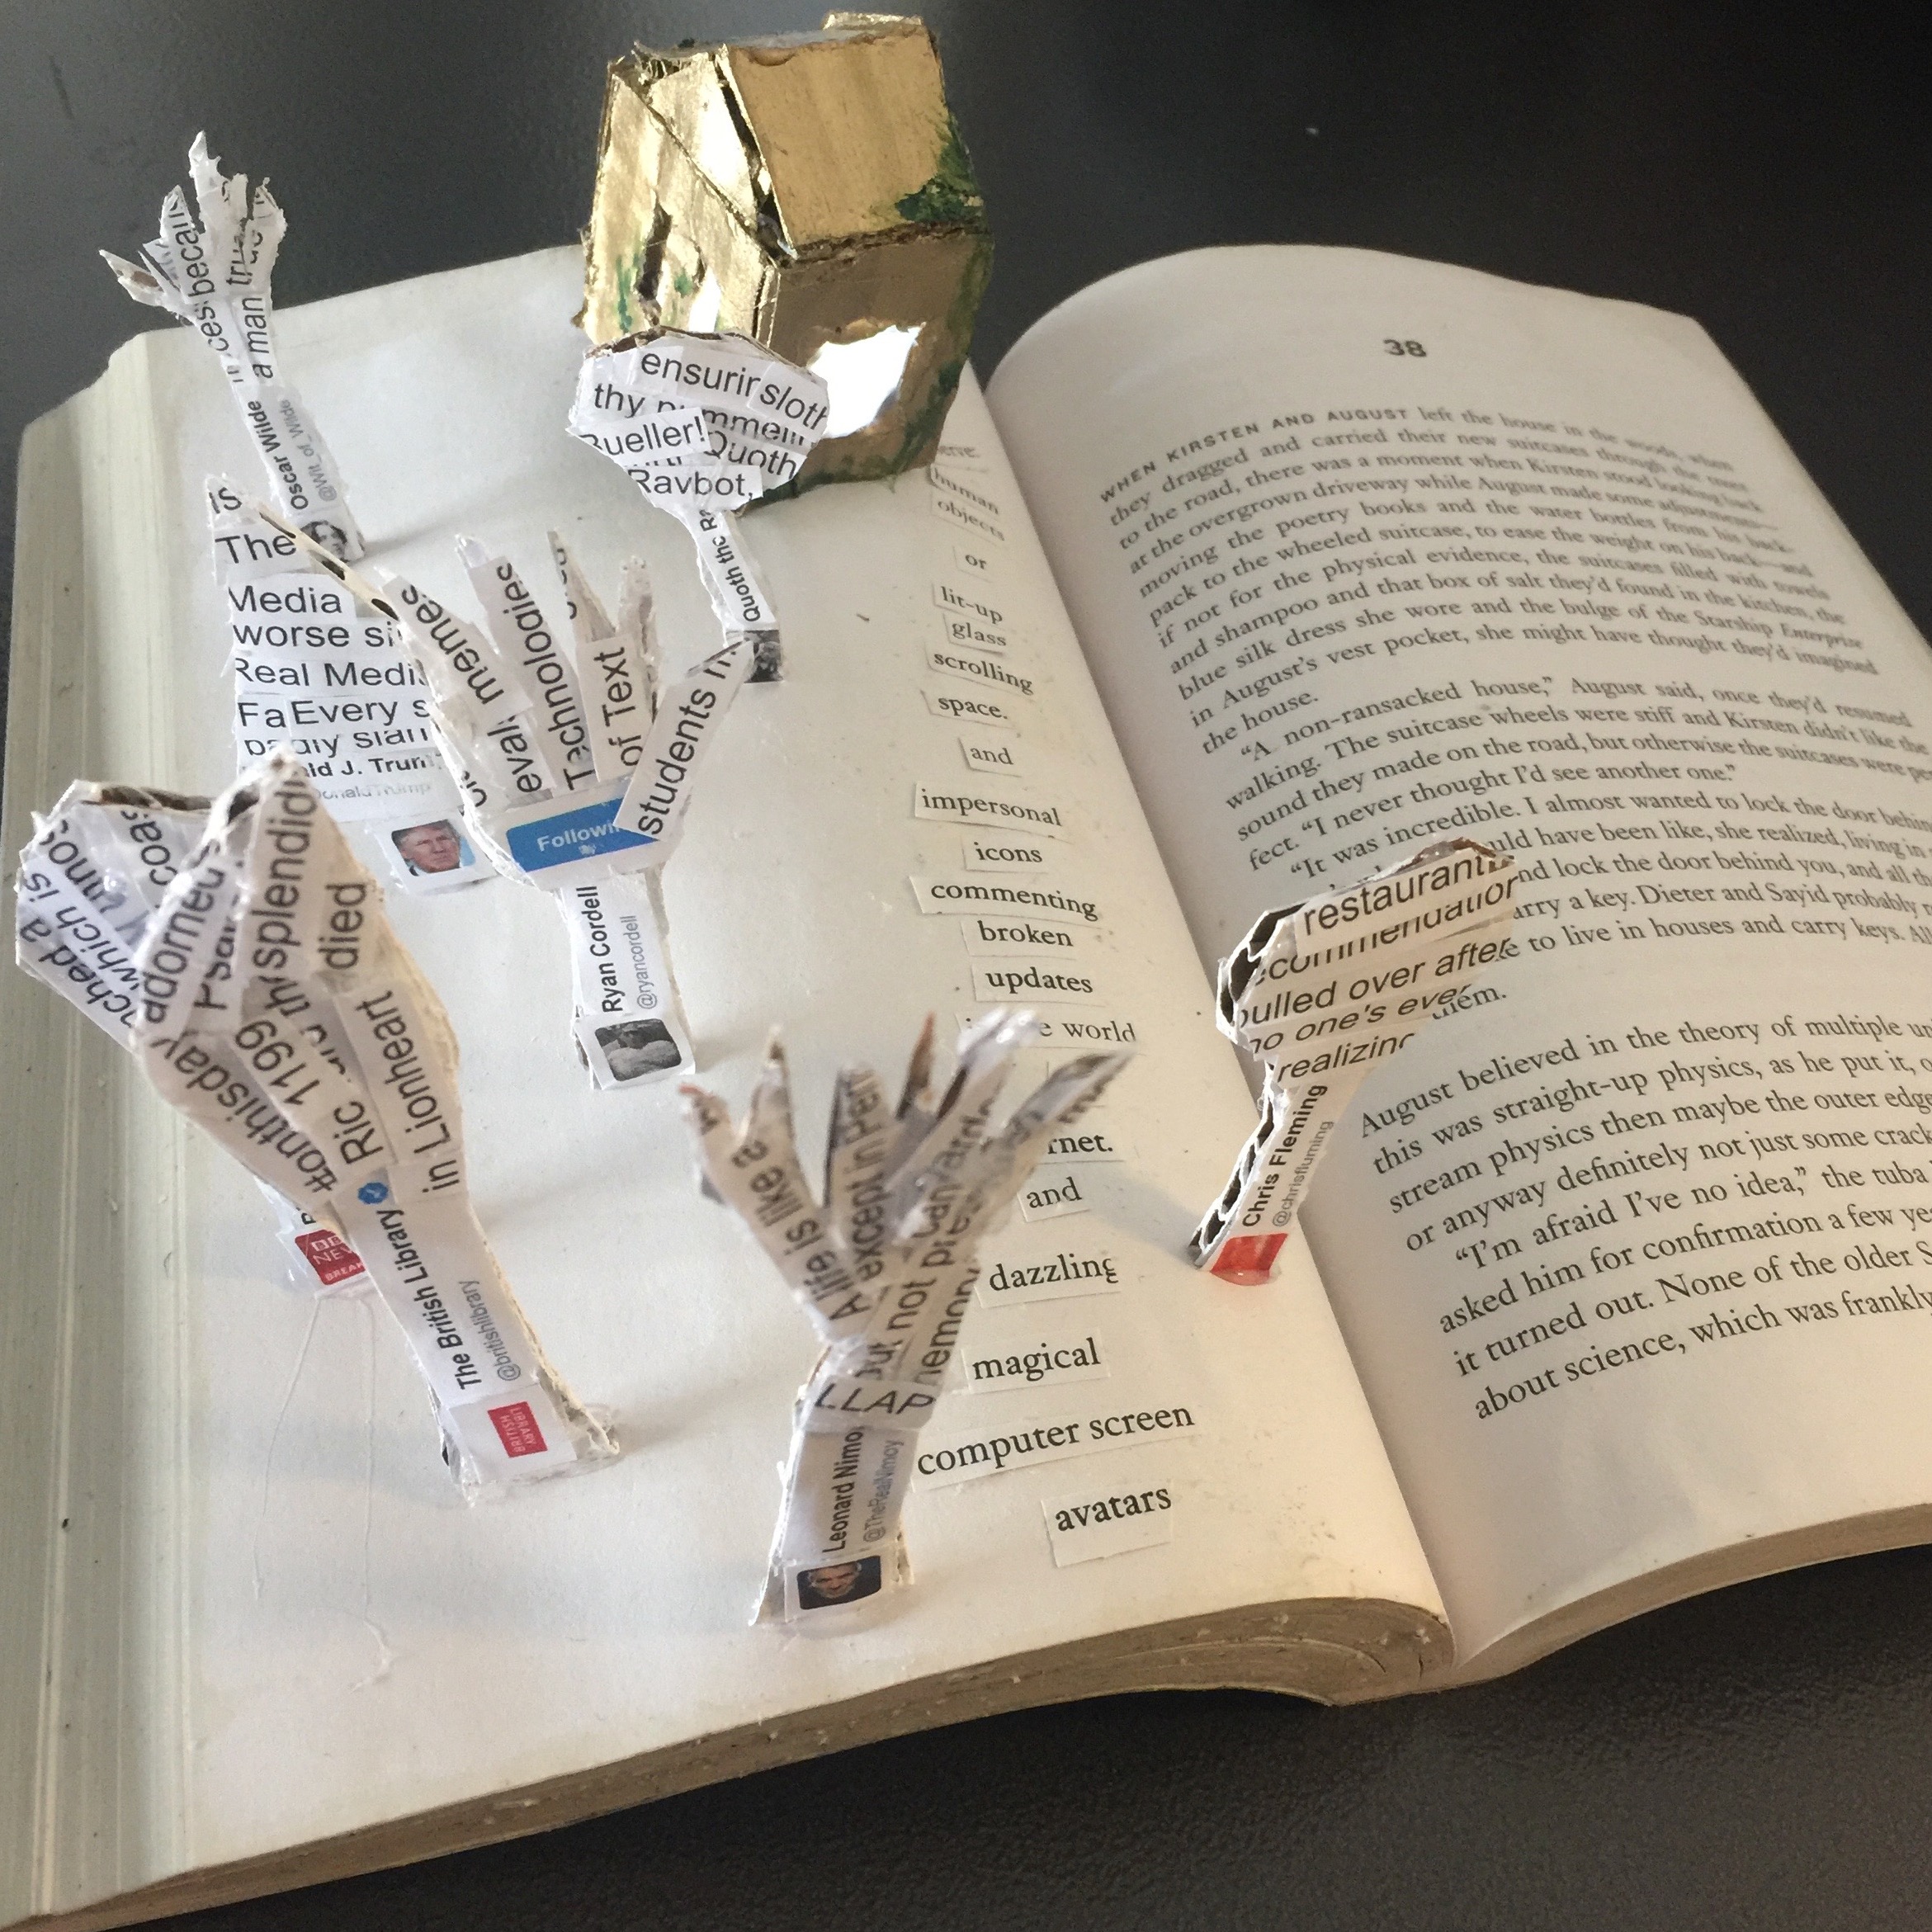 An altered book project by a former ToT student.